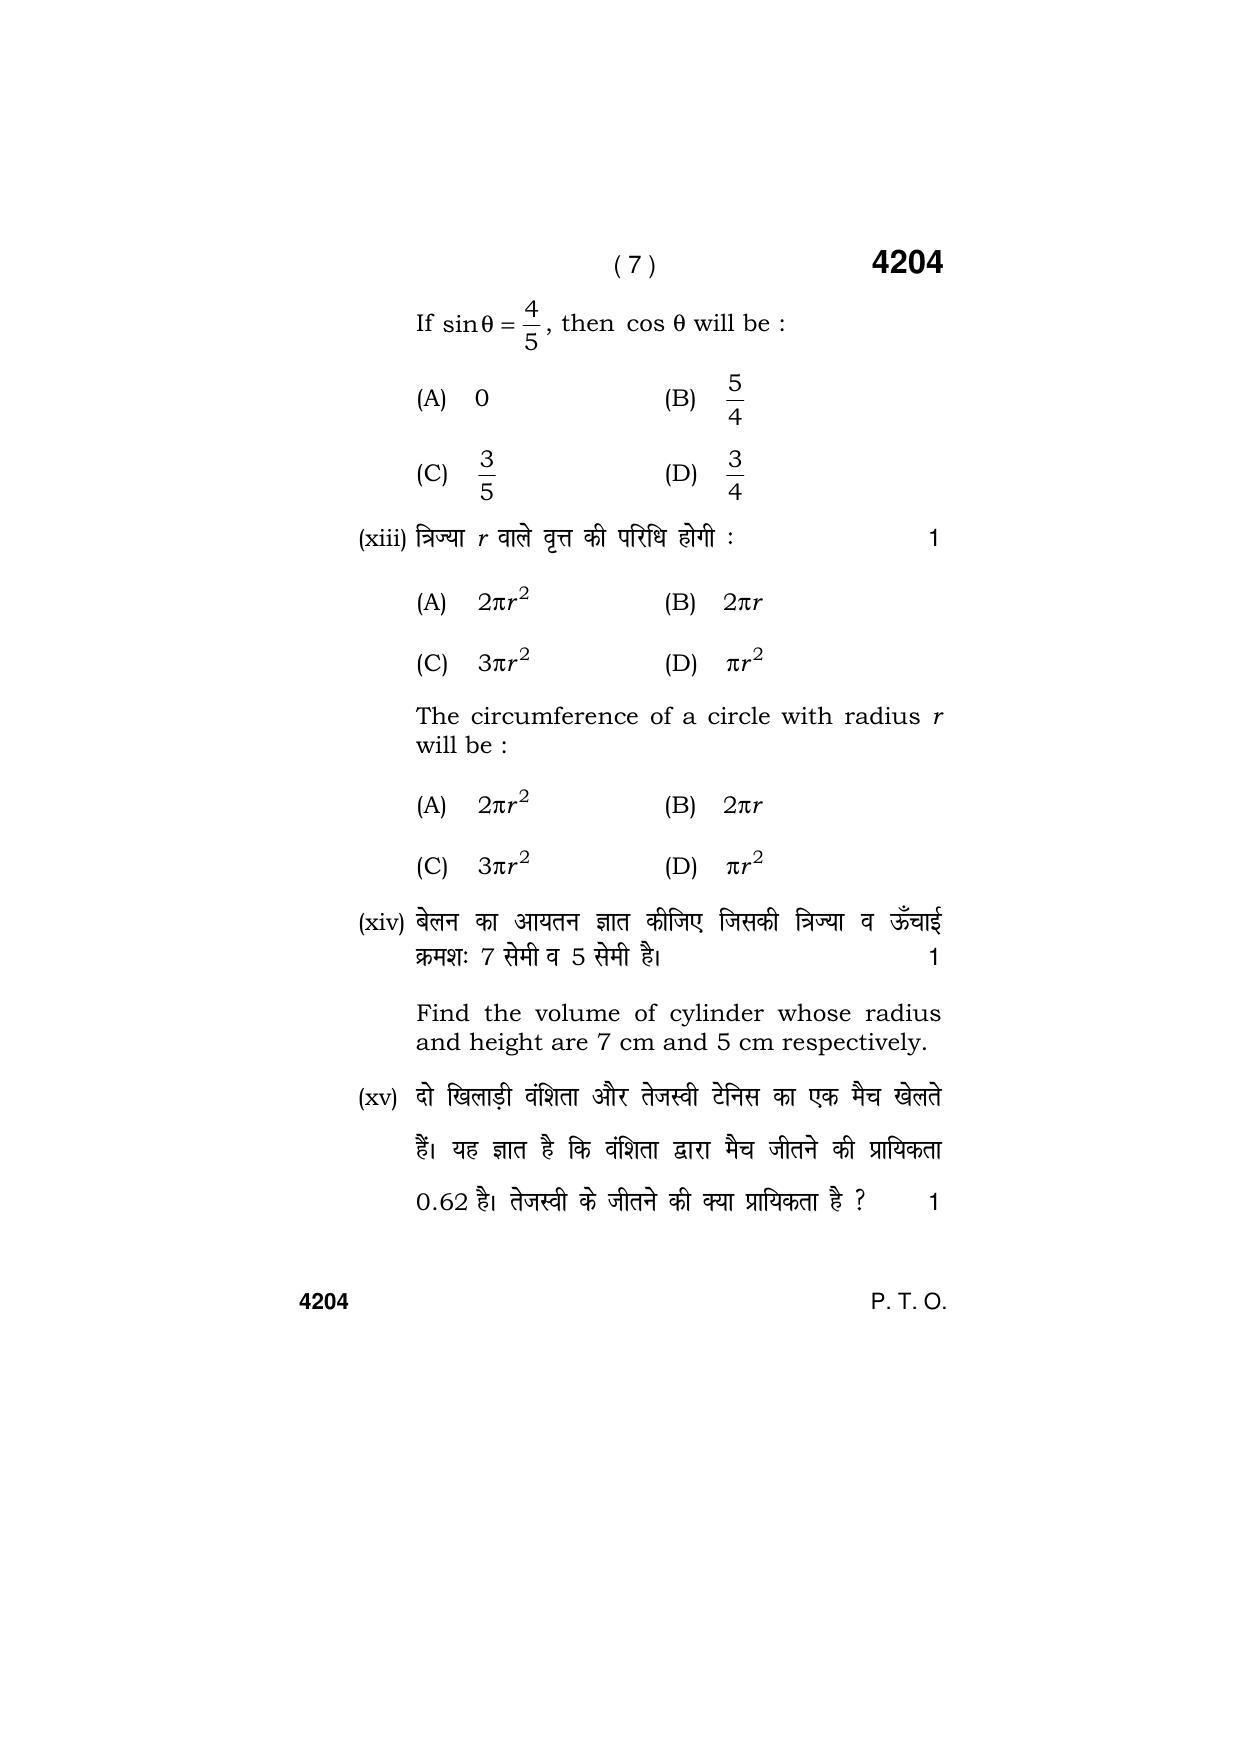 Haryana Board HBSE Class 10 Mathematics (Blind c) 2019 Question Paper - Page 7